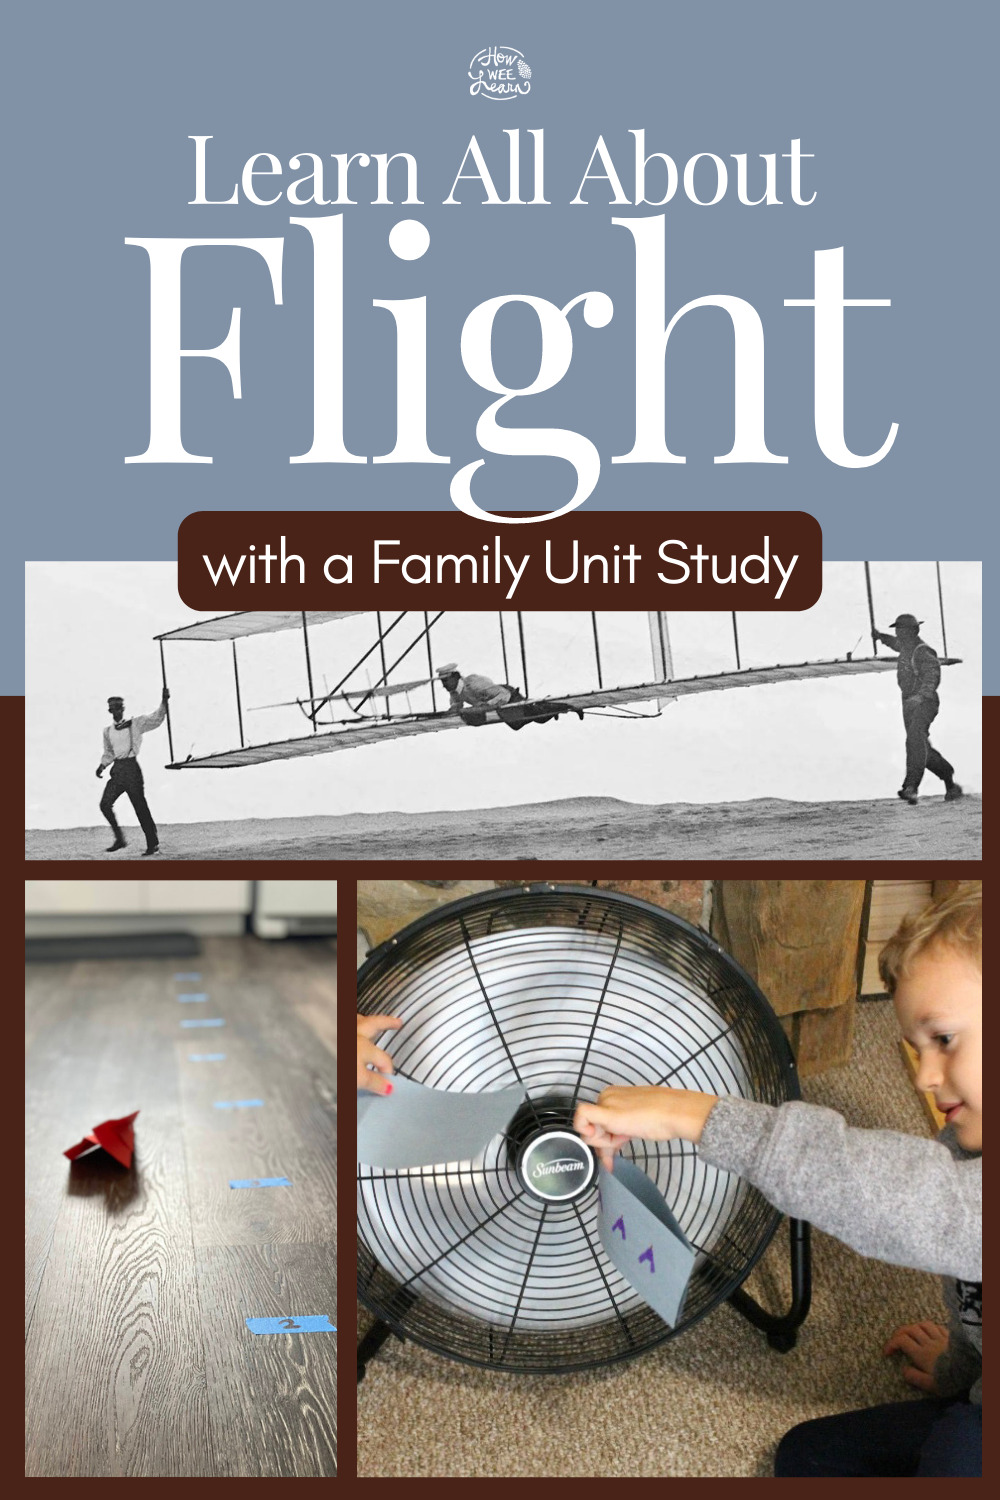 Learn All About Flight with a Family Unit Study!